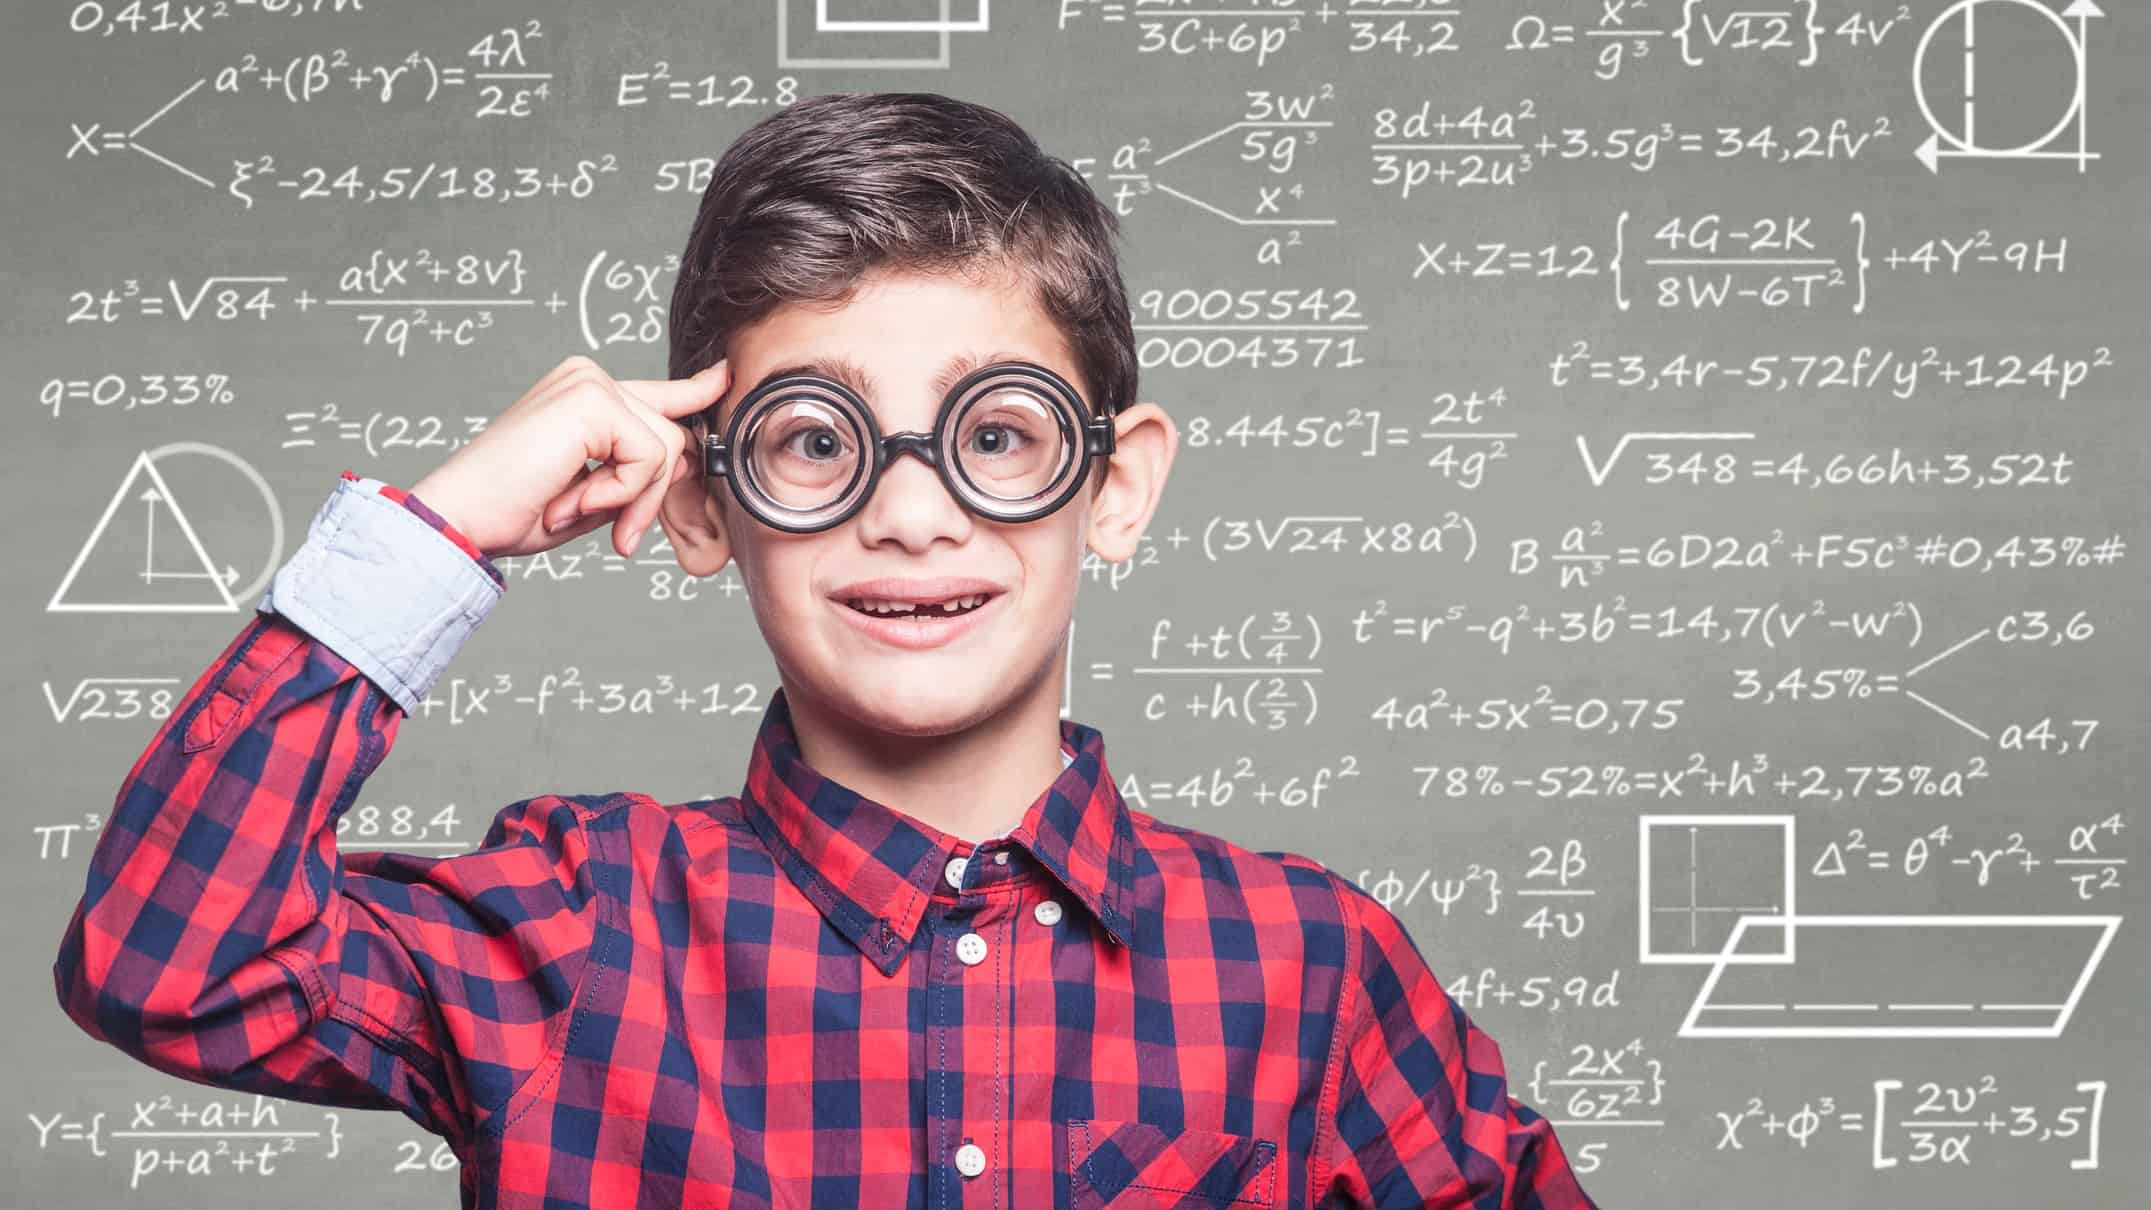 School boy wearing glasses standing in front of chalk board with maths and share price calculations on it